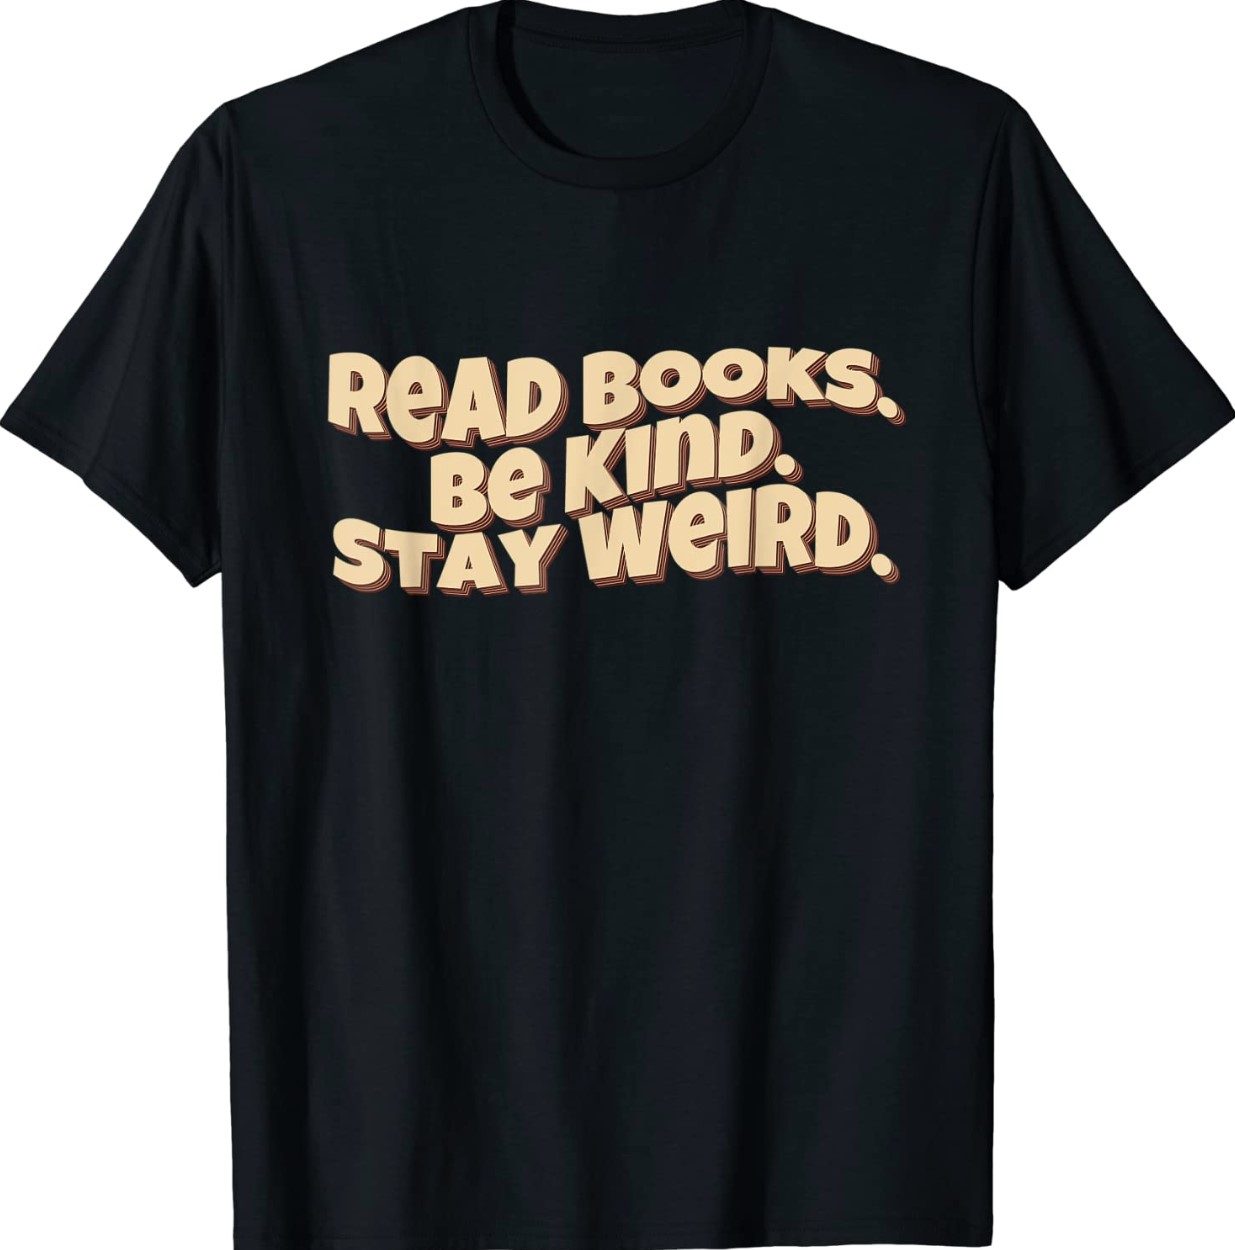 Retro Read Books Be Kind Stay Weird Funny Shirts